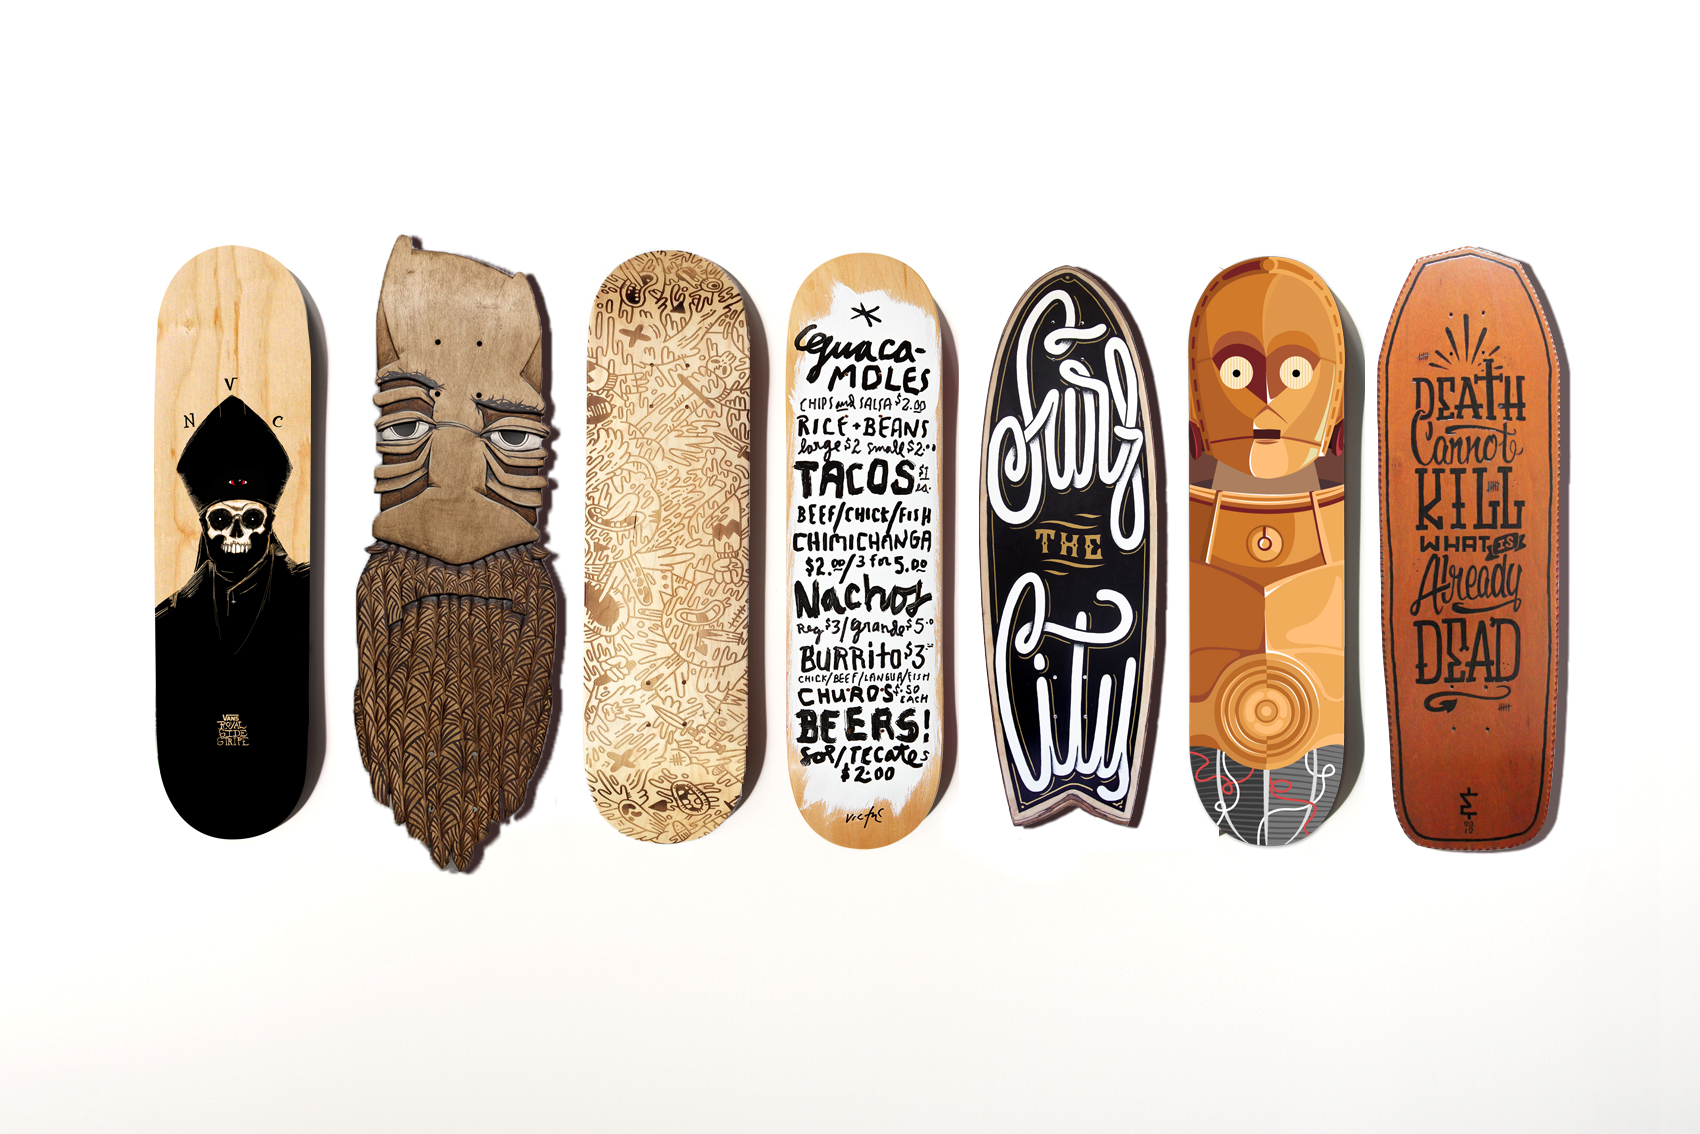 Anemoon vis Wiegen instinct History of Skate Art & Skate Graphics | The Daily Board